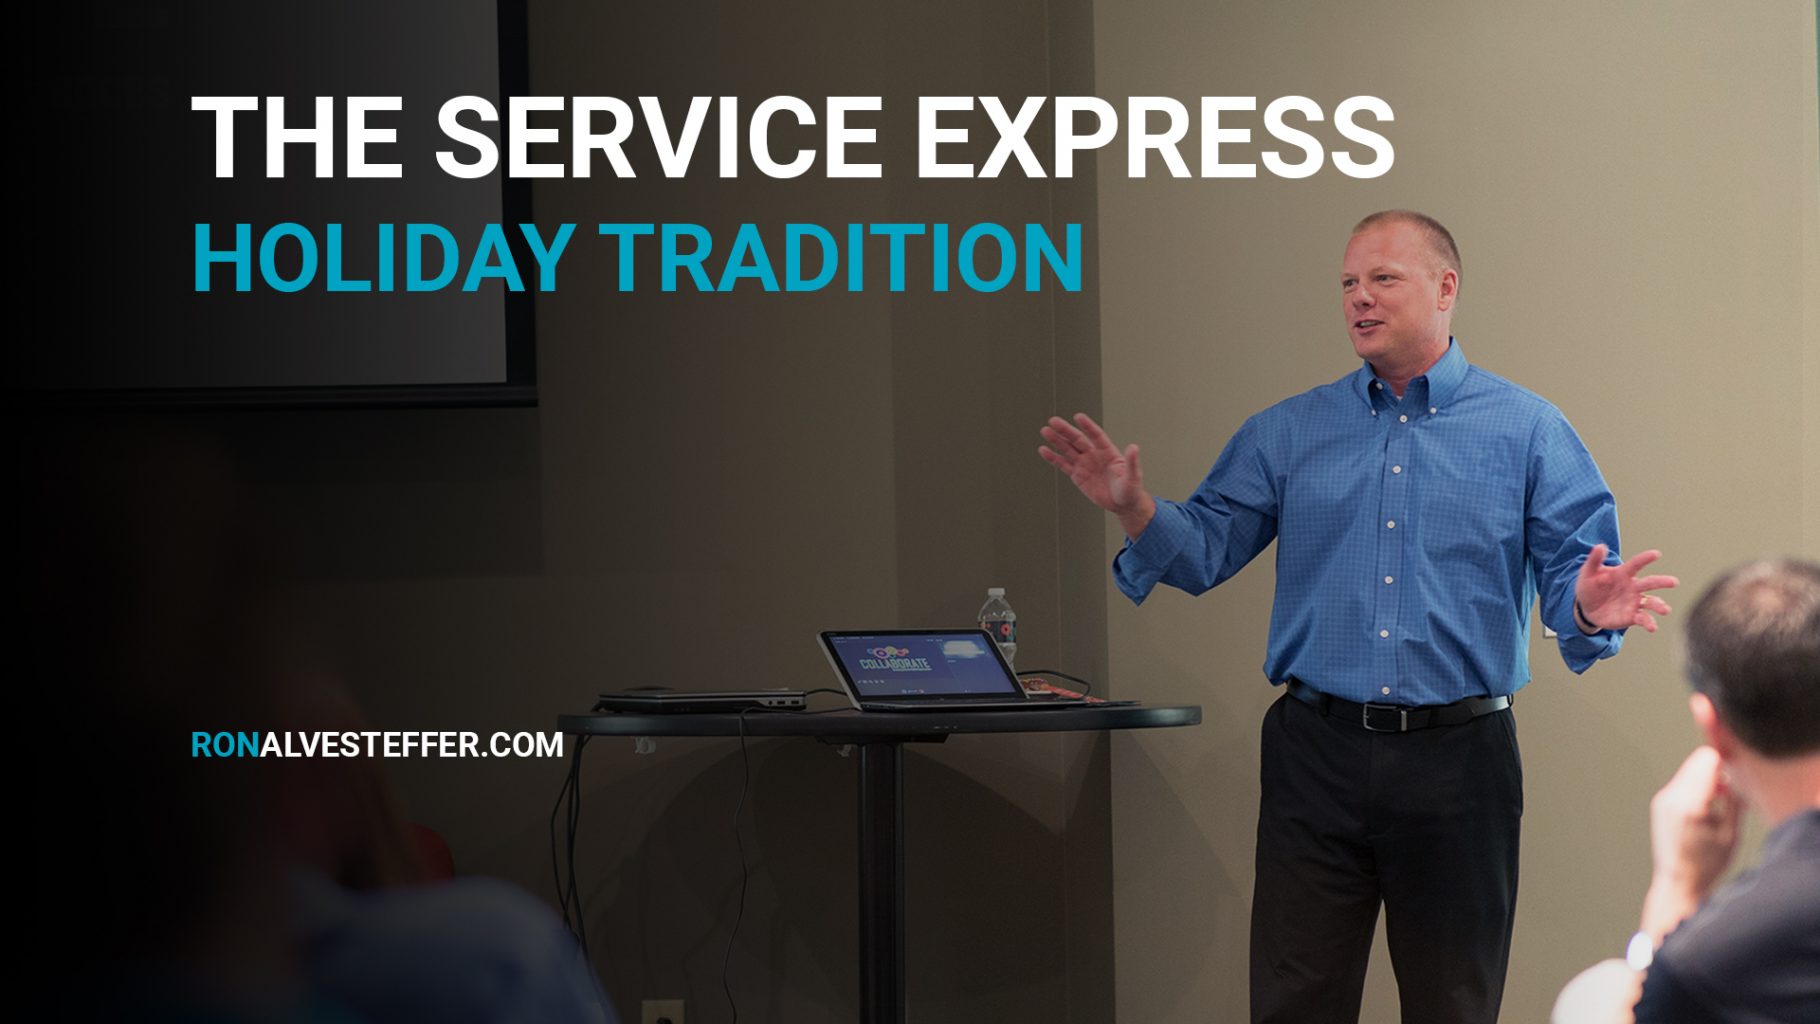 A Service Express Holiday Tradition